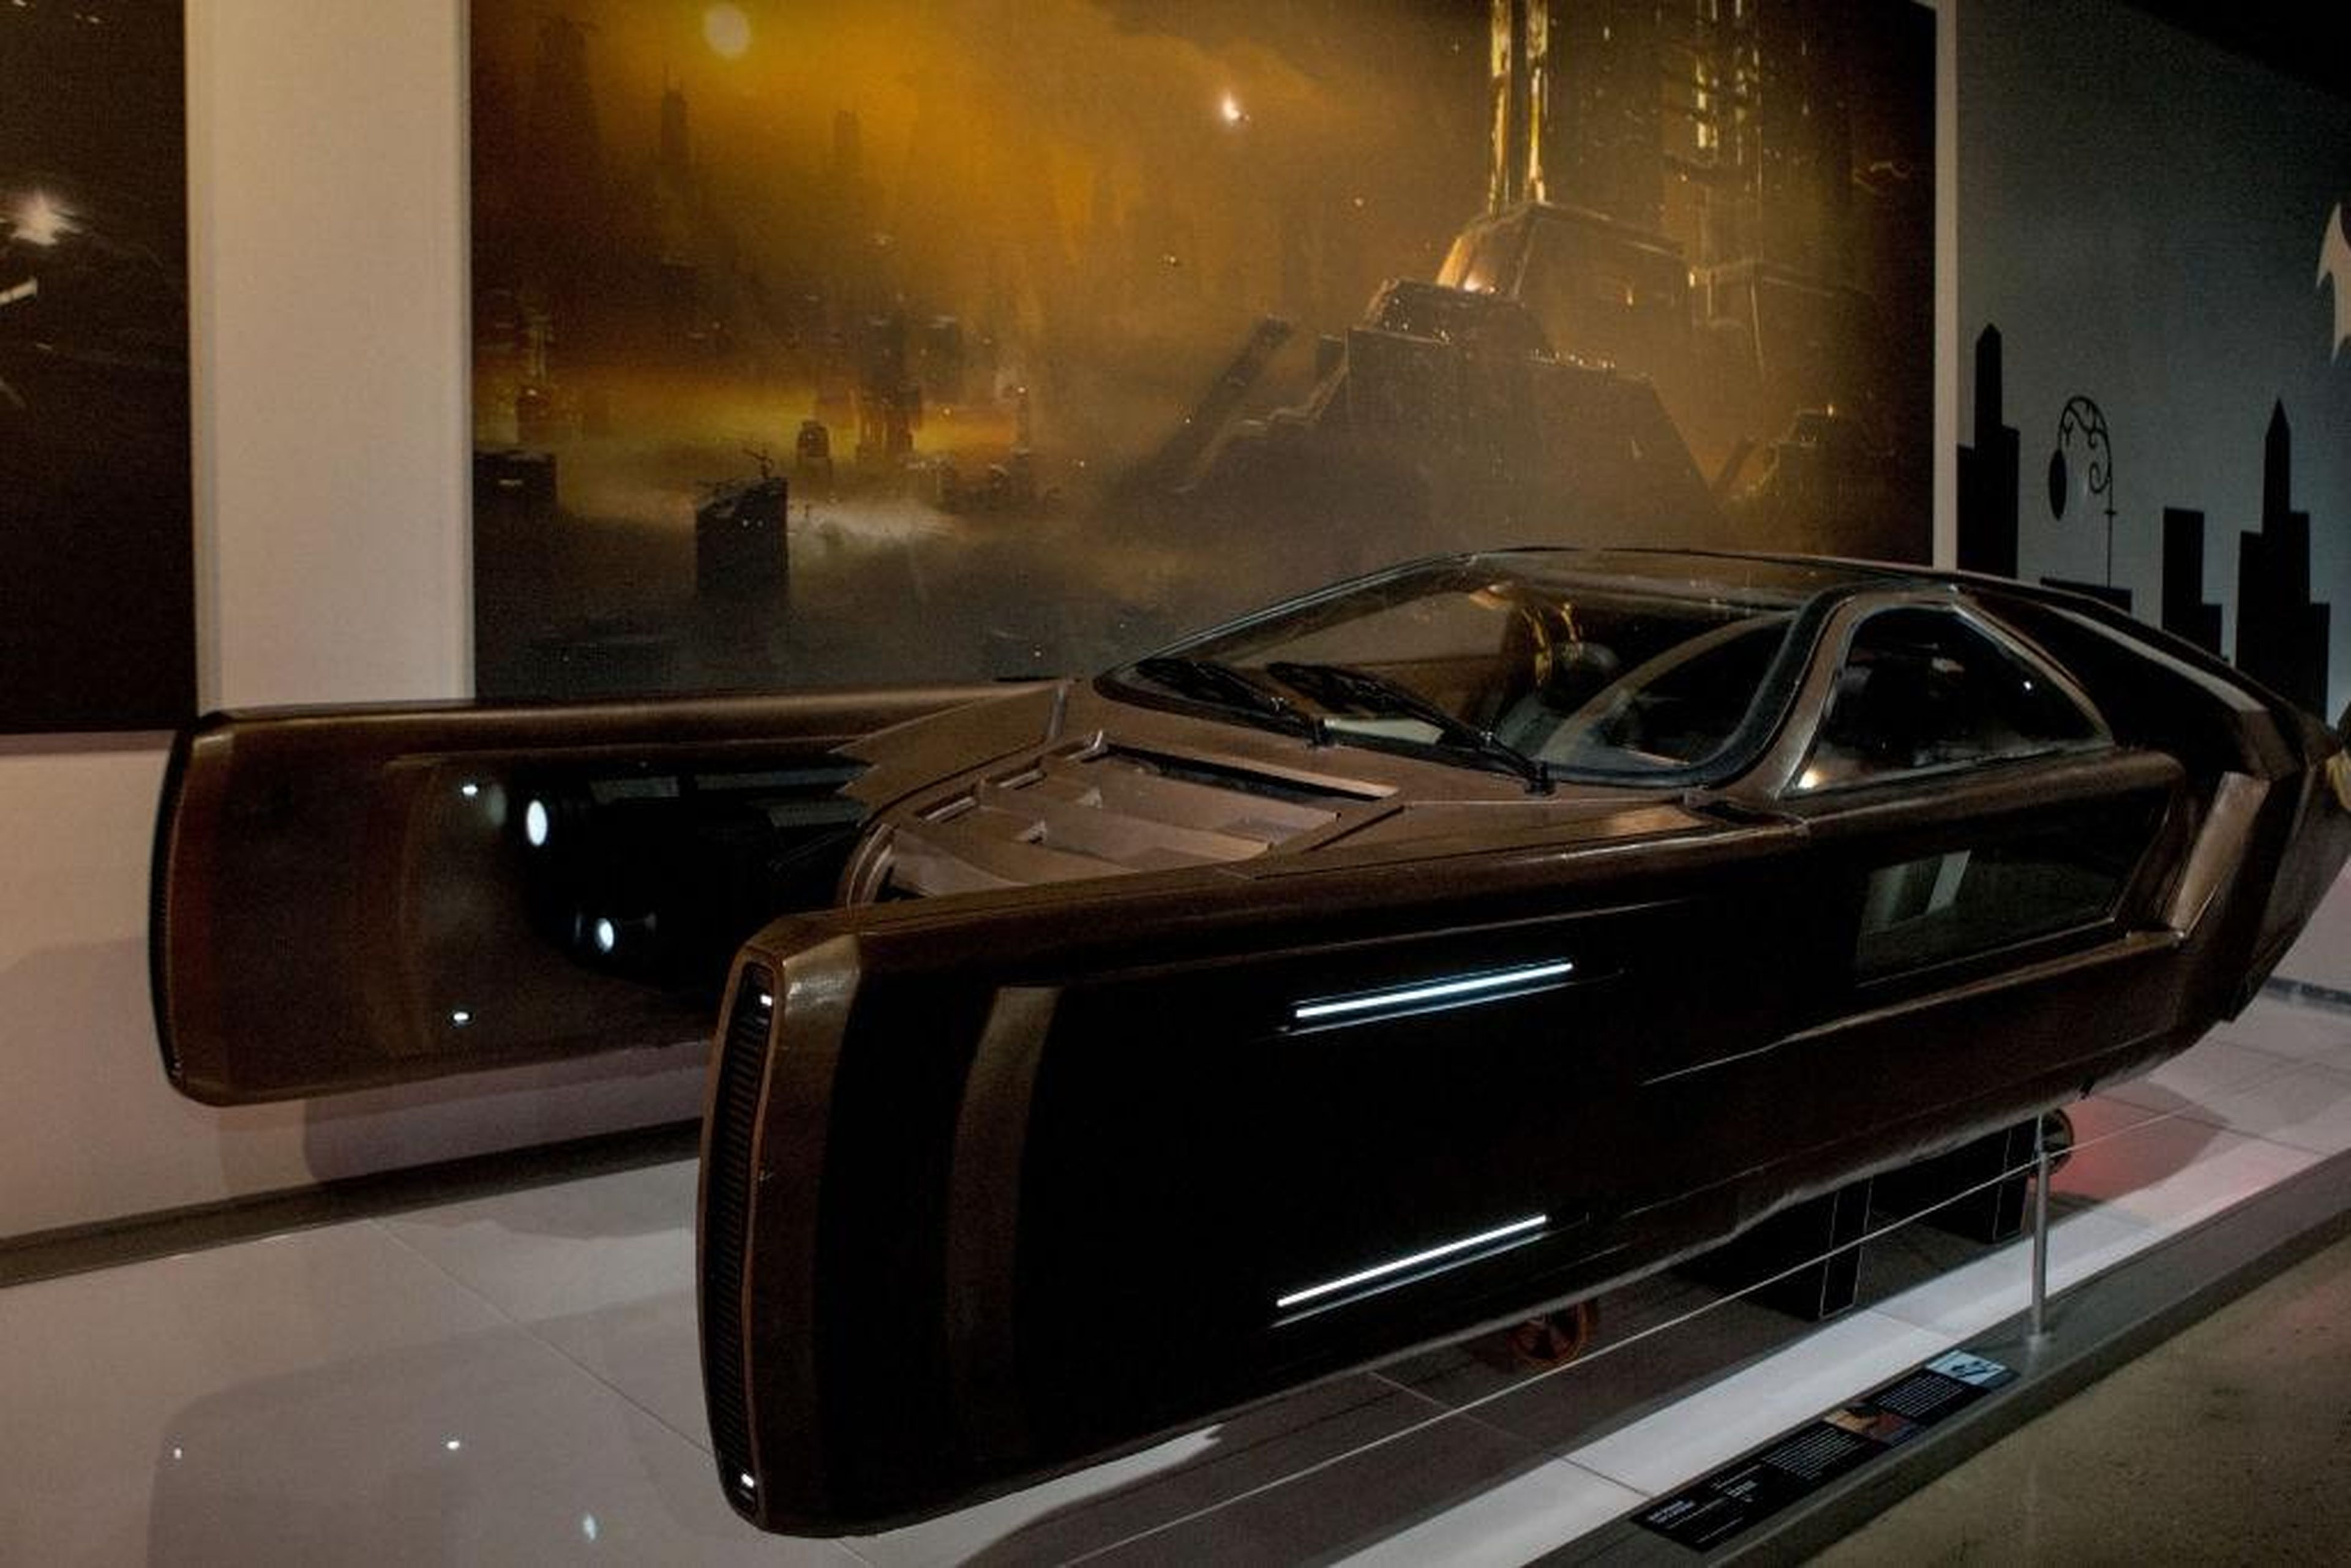 A Spinner from the movie "Blade Runner" — these flying car's from director Ridley Scott's 1982 sci-fi epic were cited by Musk as inspiration for the Cybertruck.